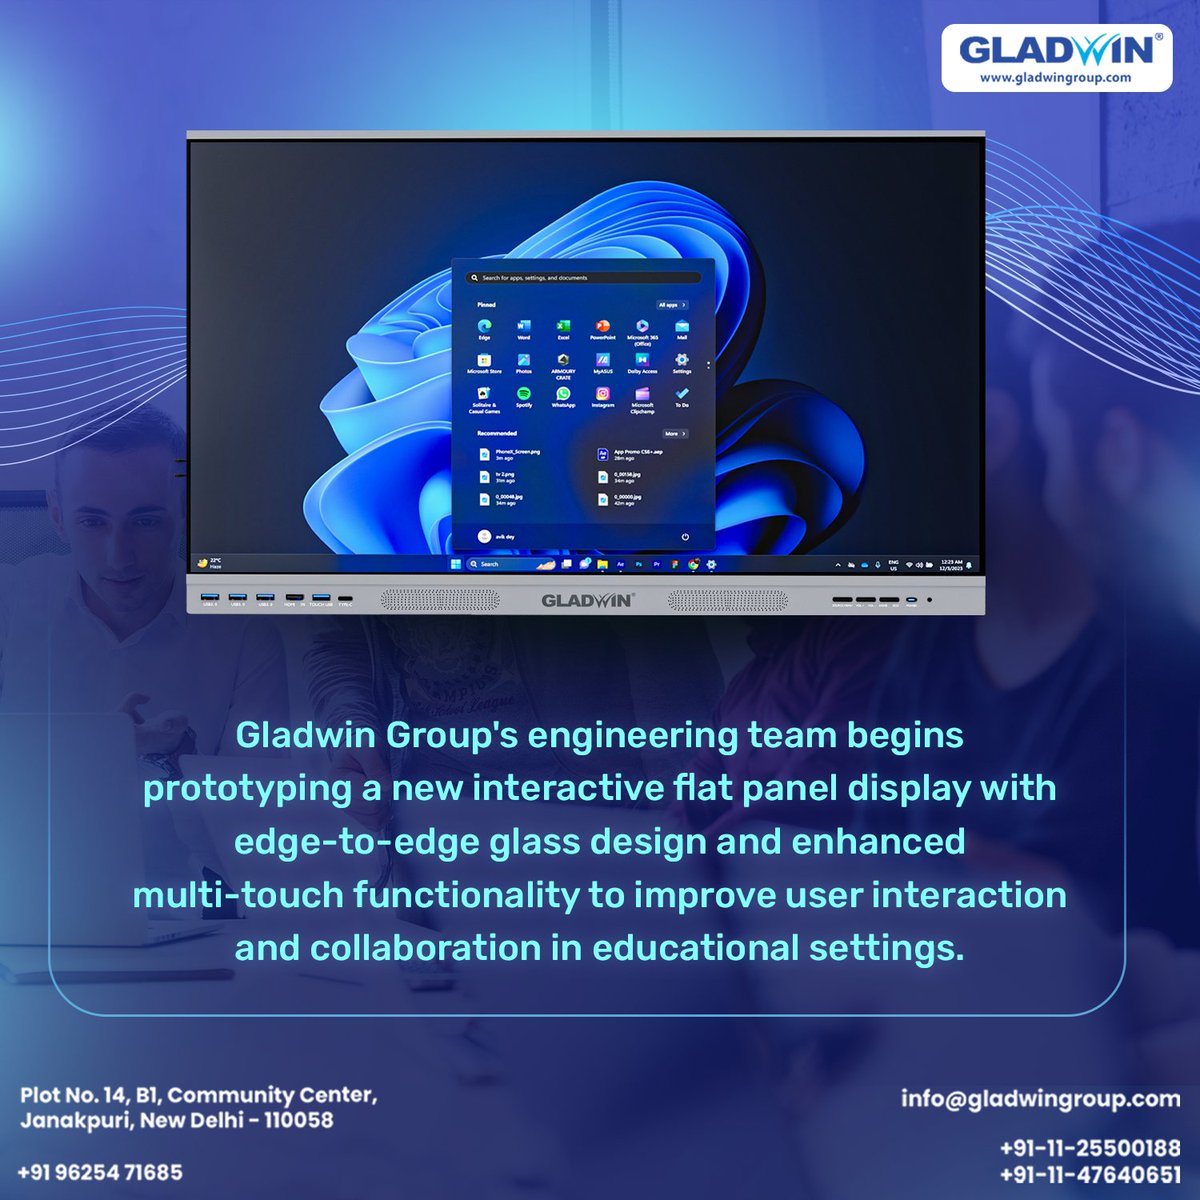 Exciting news from Gladwin Group! Check our latest Interactive Flat Panels Today!

#gladwingroup #interactiveflatpanel #educationtechnology #edtech #interactivelearning #IFP #futureoflearning #techineducation #interactivedisplay #technologyineducation #tech #technology